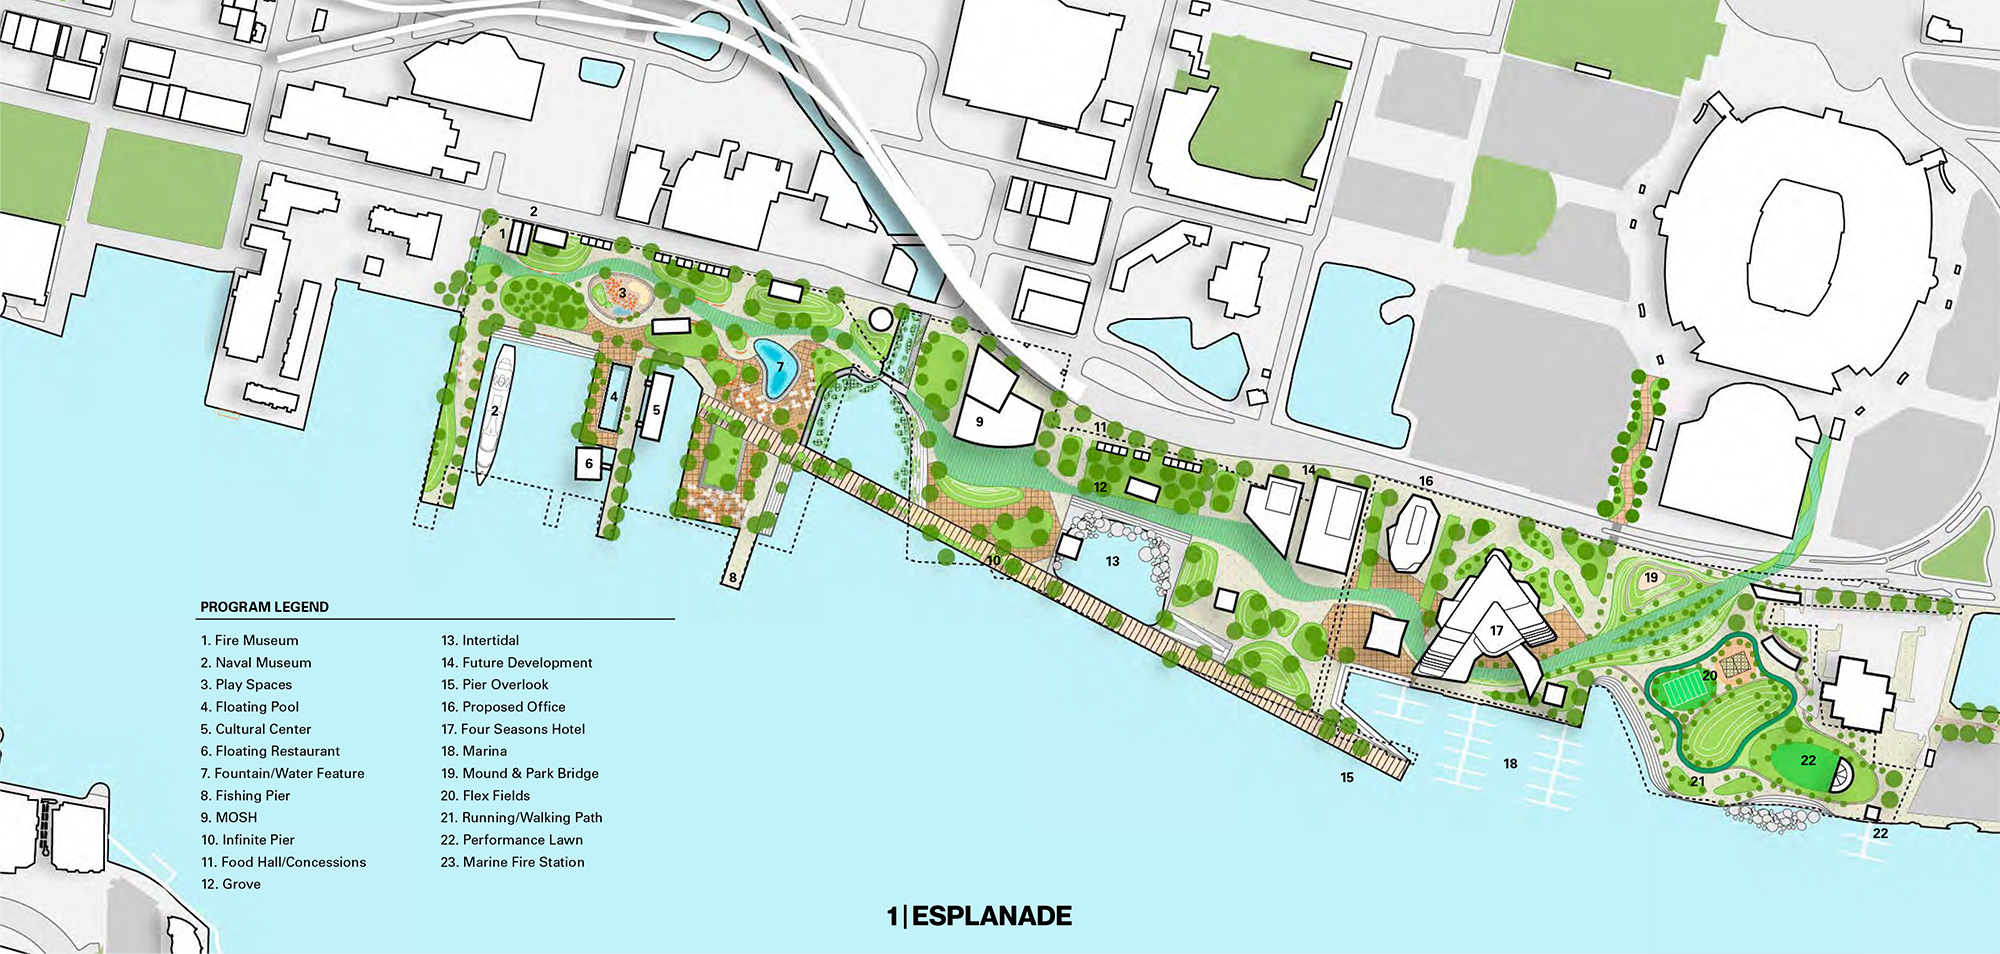 The duPont Fund drafted a nearly $500,000 riverfront connectivity study that includes an “esplanade” plan for Shipyards West.